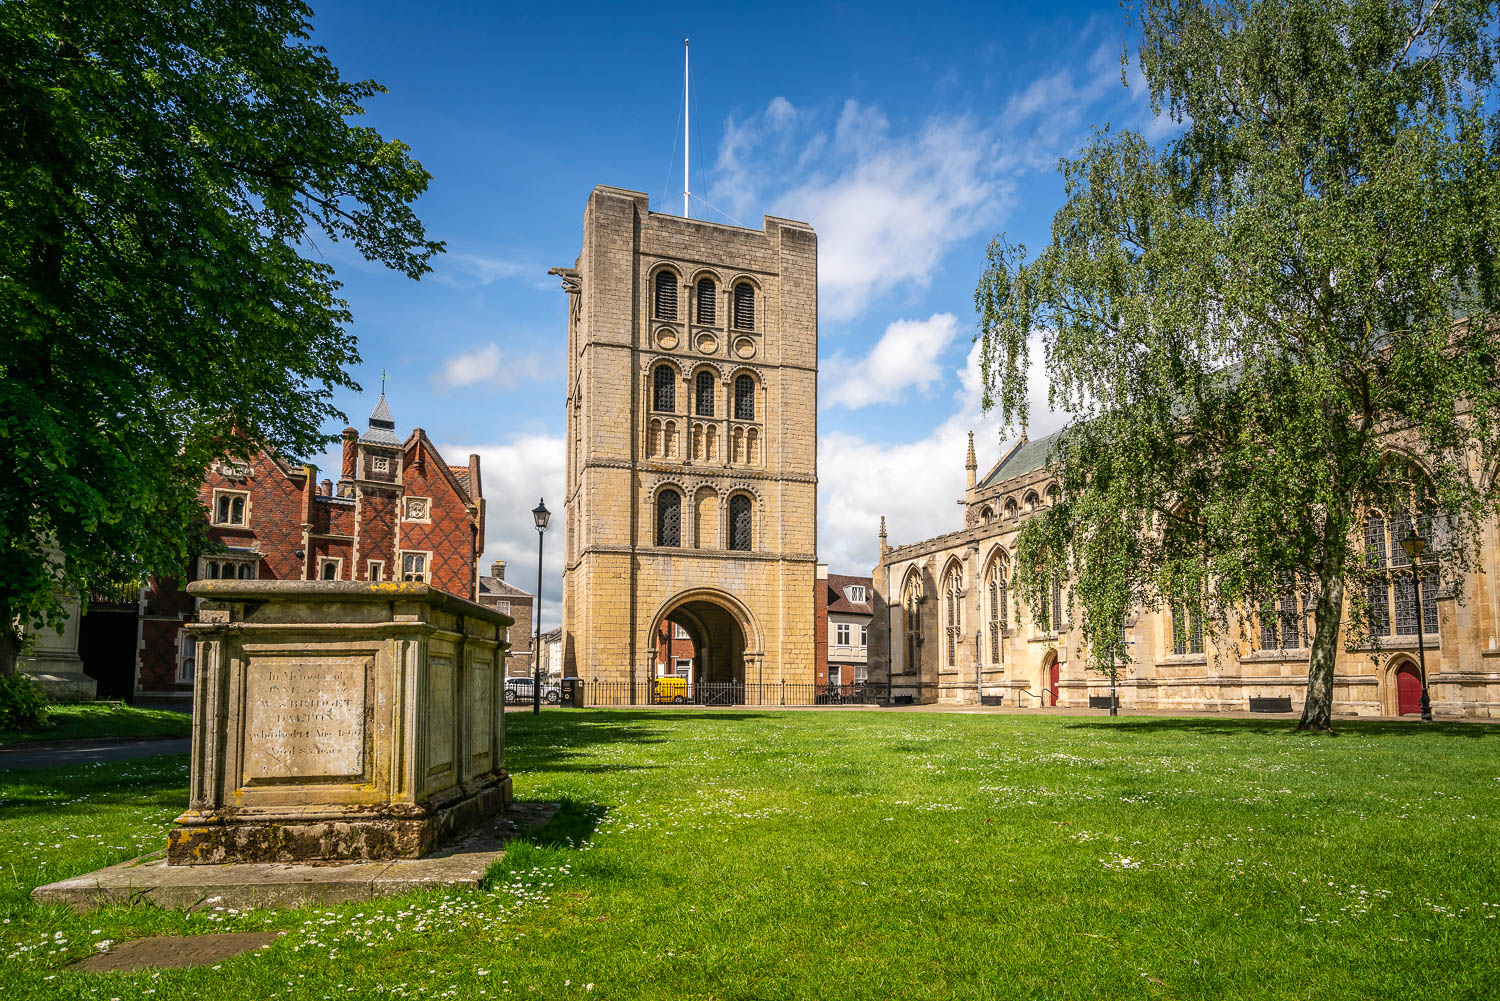 Norman Tower and St Edmundsbury cathedral in Bury St Edmunds - one of the many things to do in Suffolk with kids